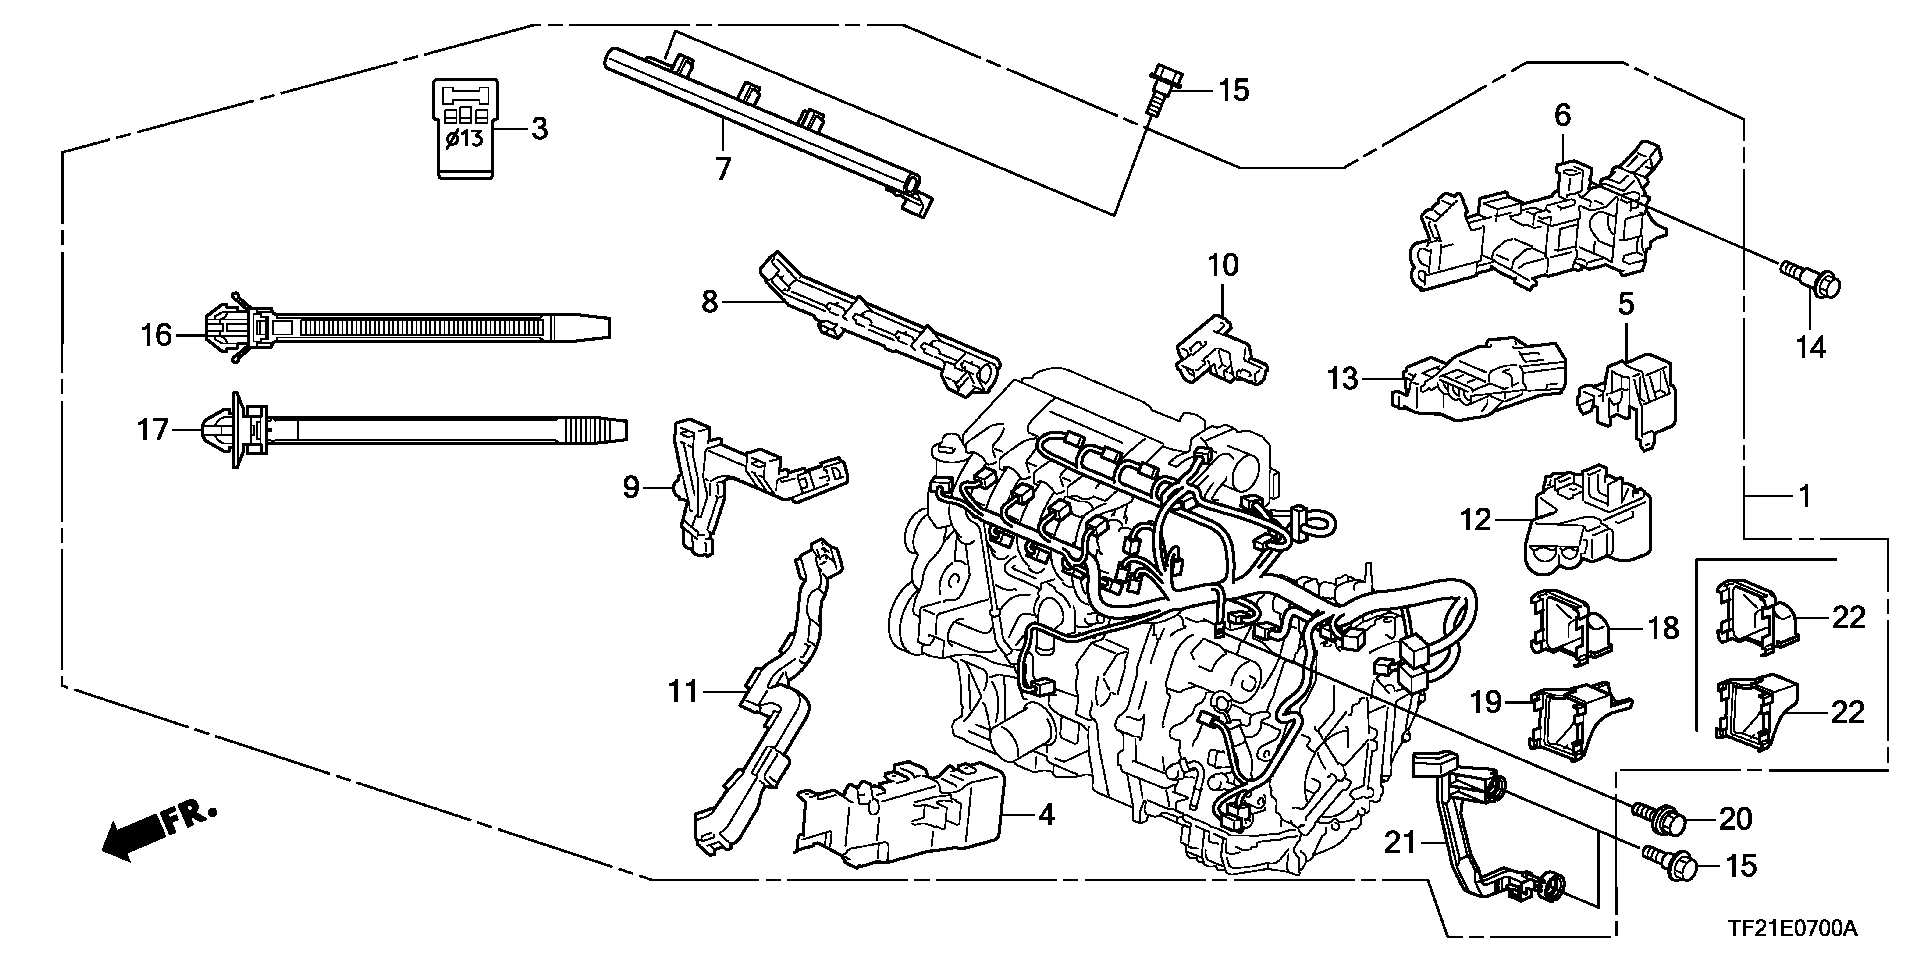 ENGINE WIRE HARNESS(1.3L)